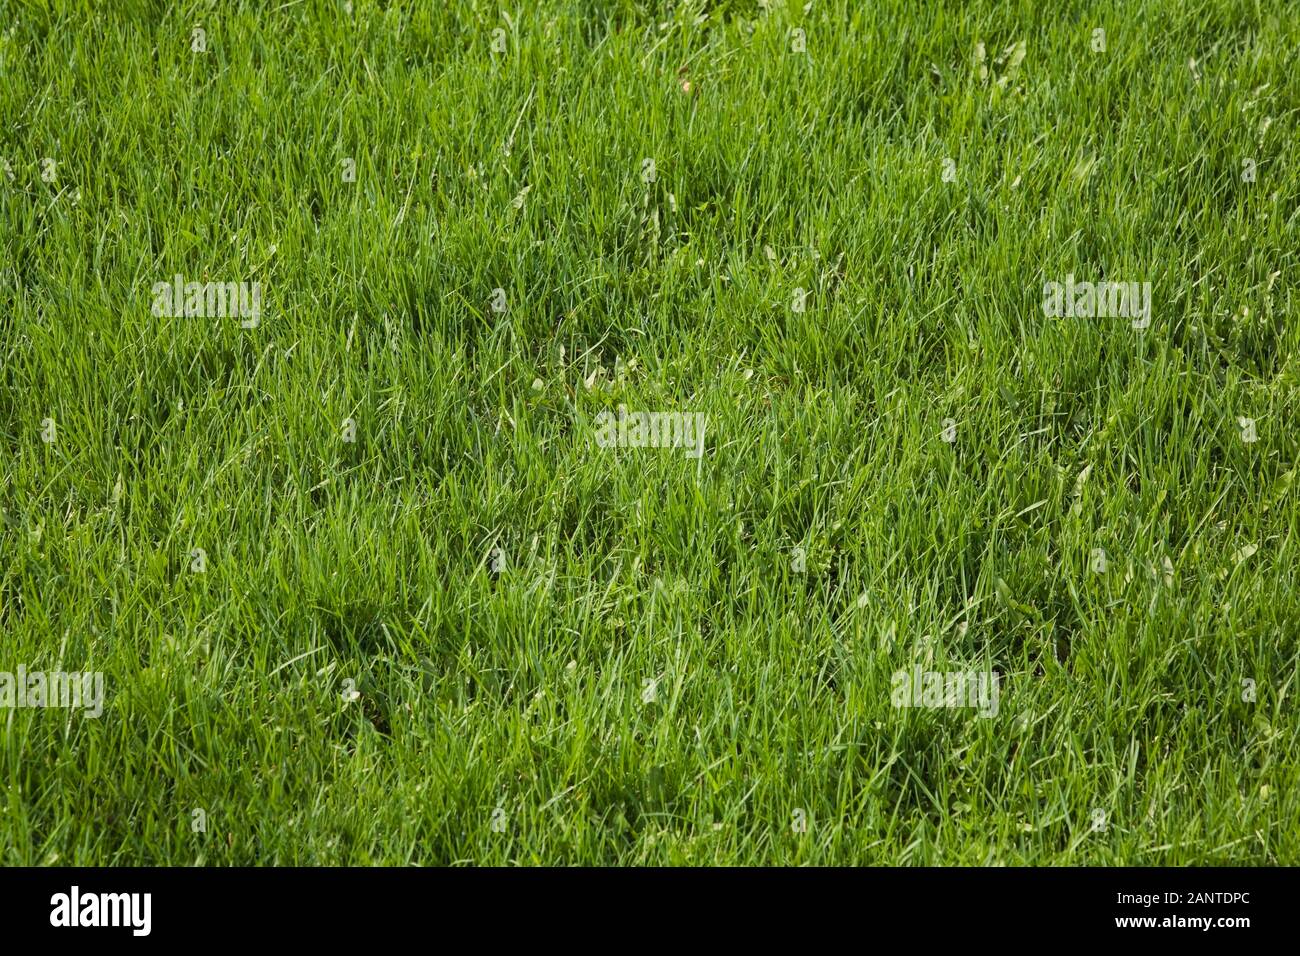 Close-up of cool green grass lawn with mix of Lolium perenne - Perennial Rye grass, Agrostis palustris - Creeping bentgrass, Festuca arundinacea. Stock Photo